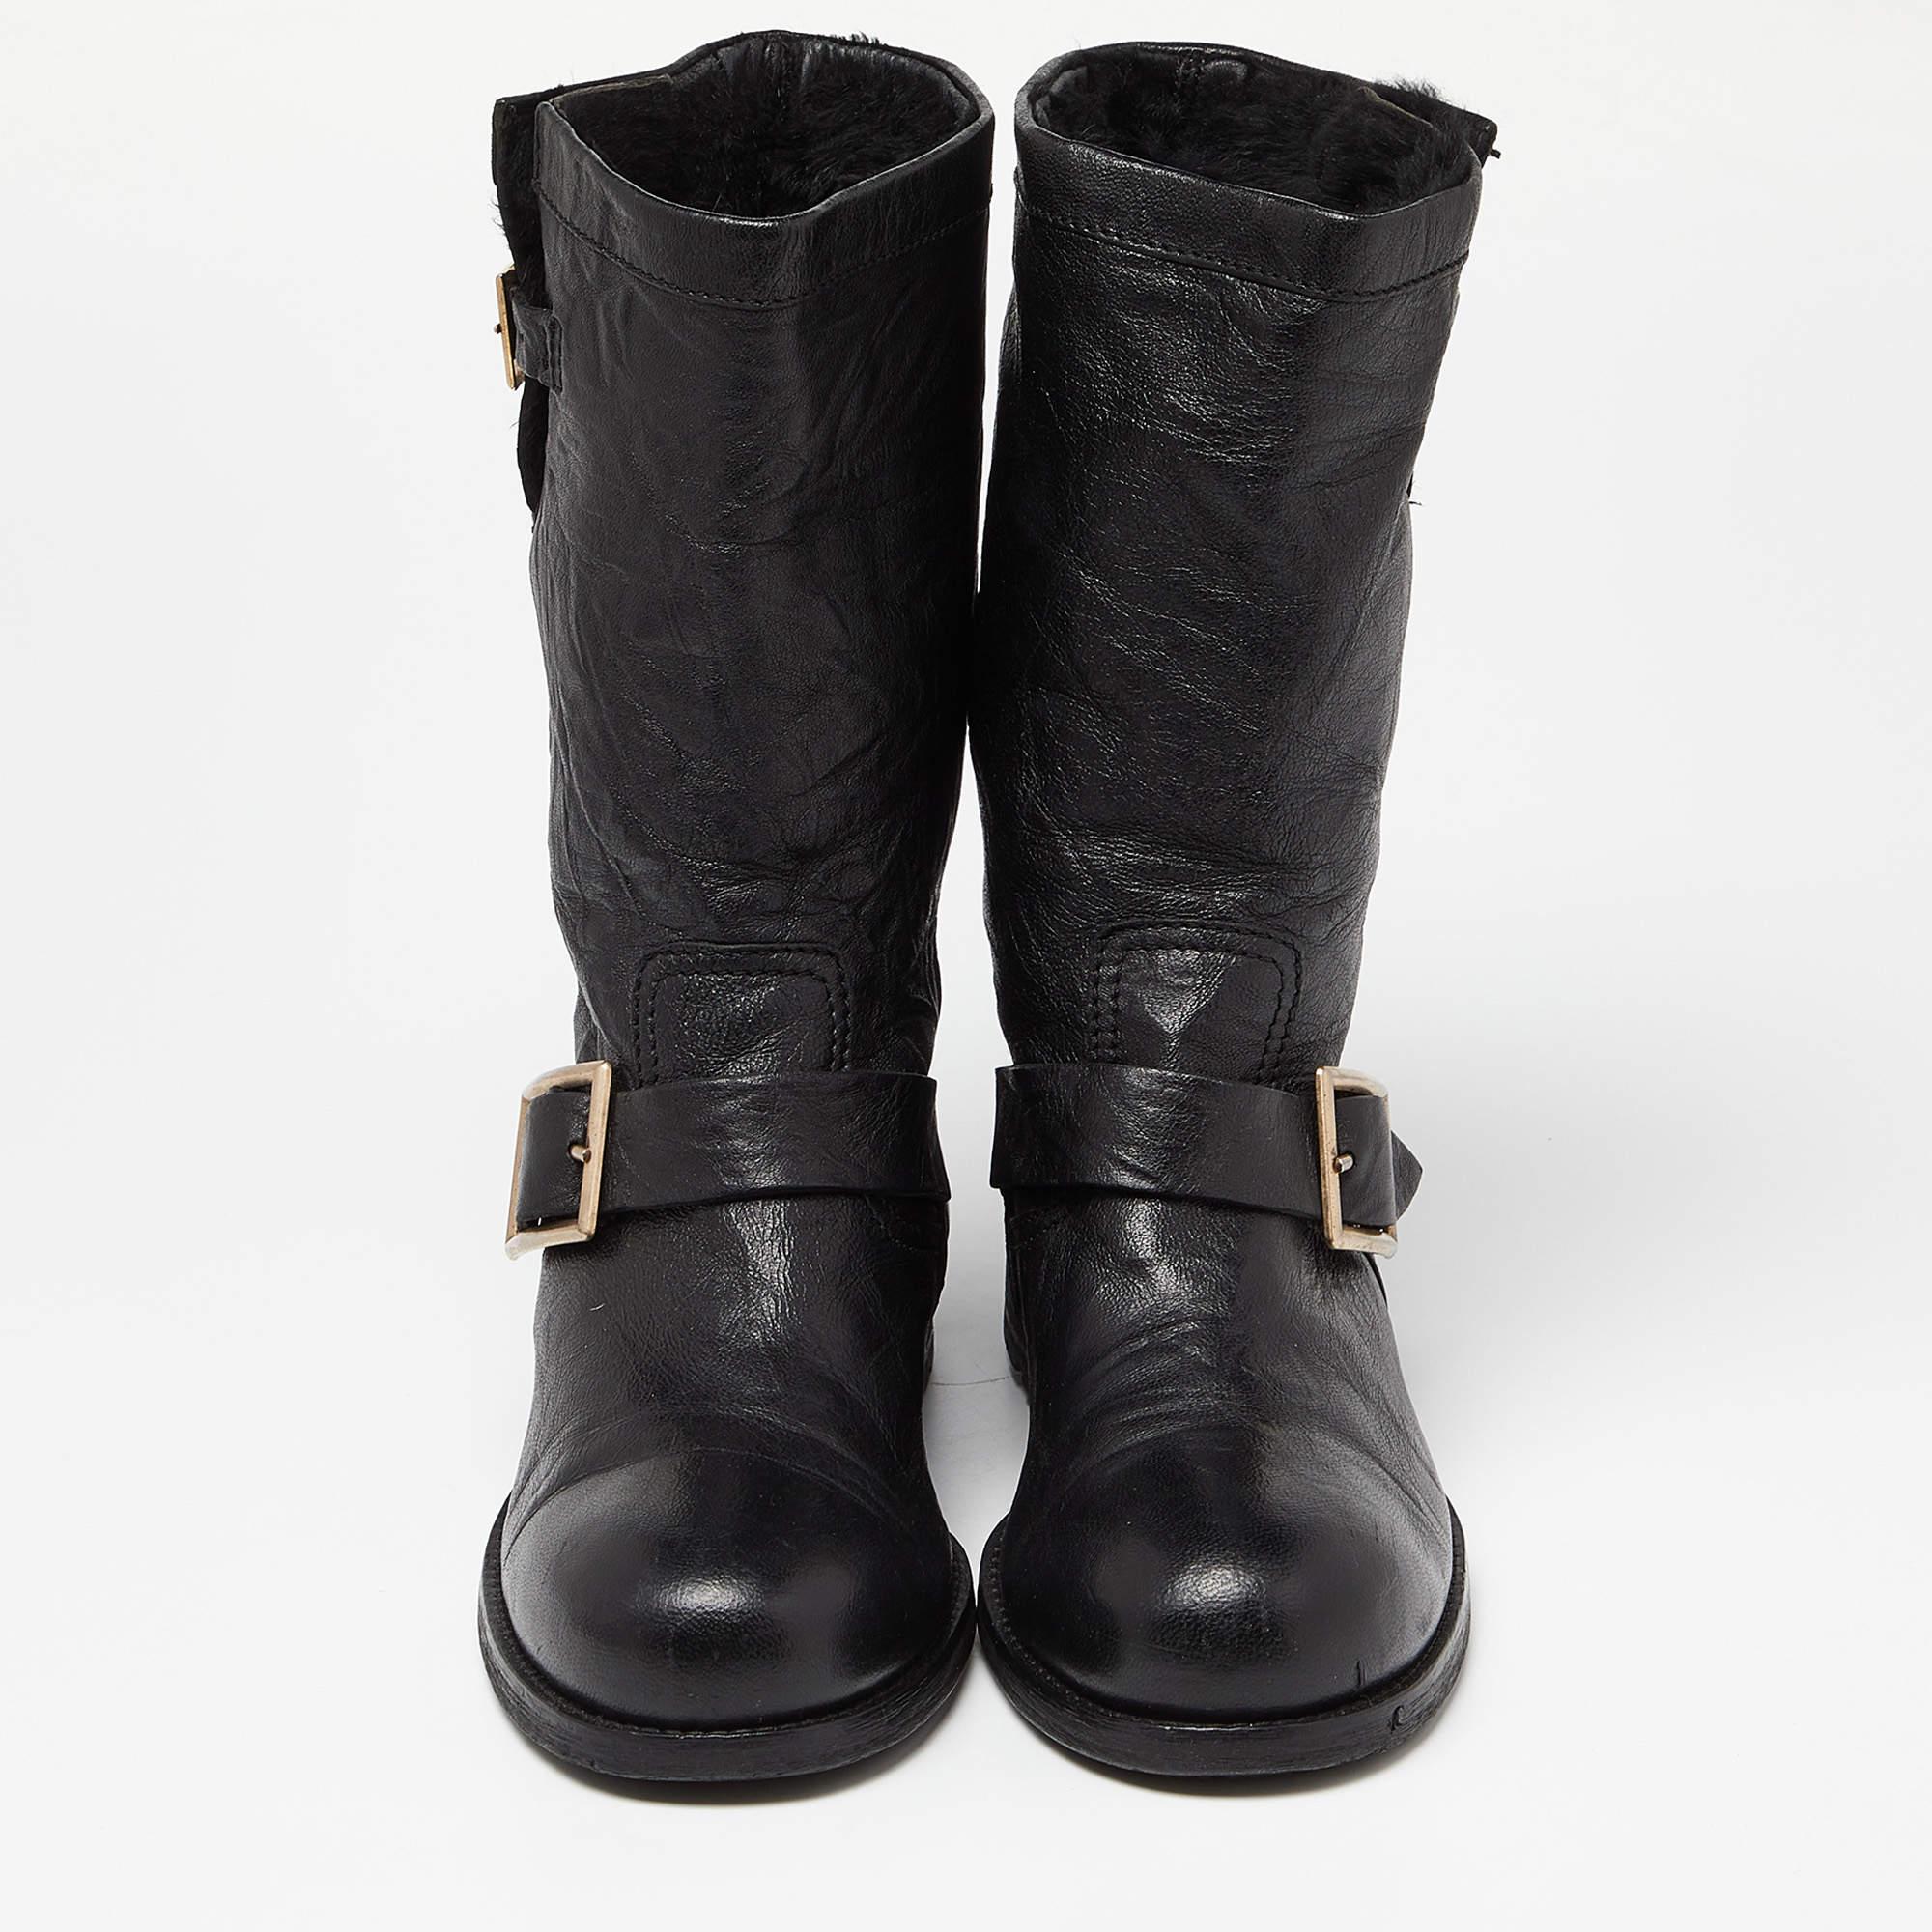 Jimmy Choo Black Leather Buckle Detail Mid Calf Biker Boots Size 38 For Sale 1